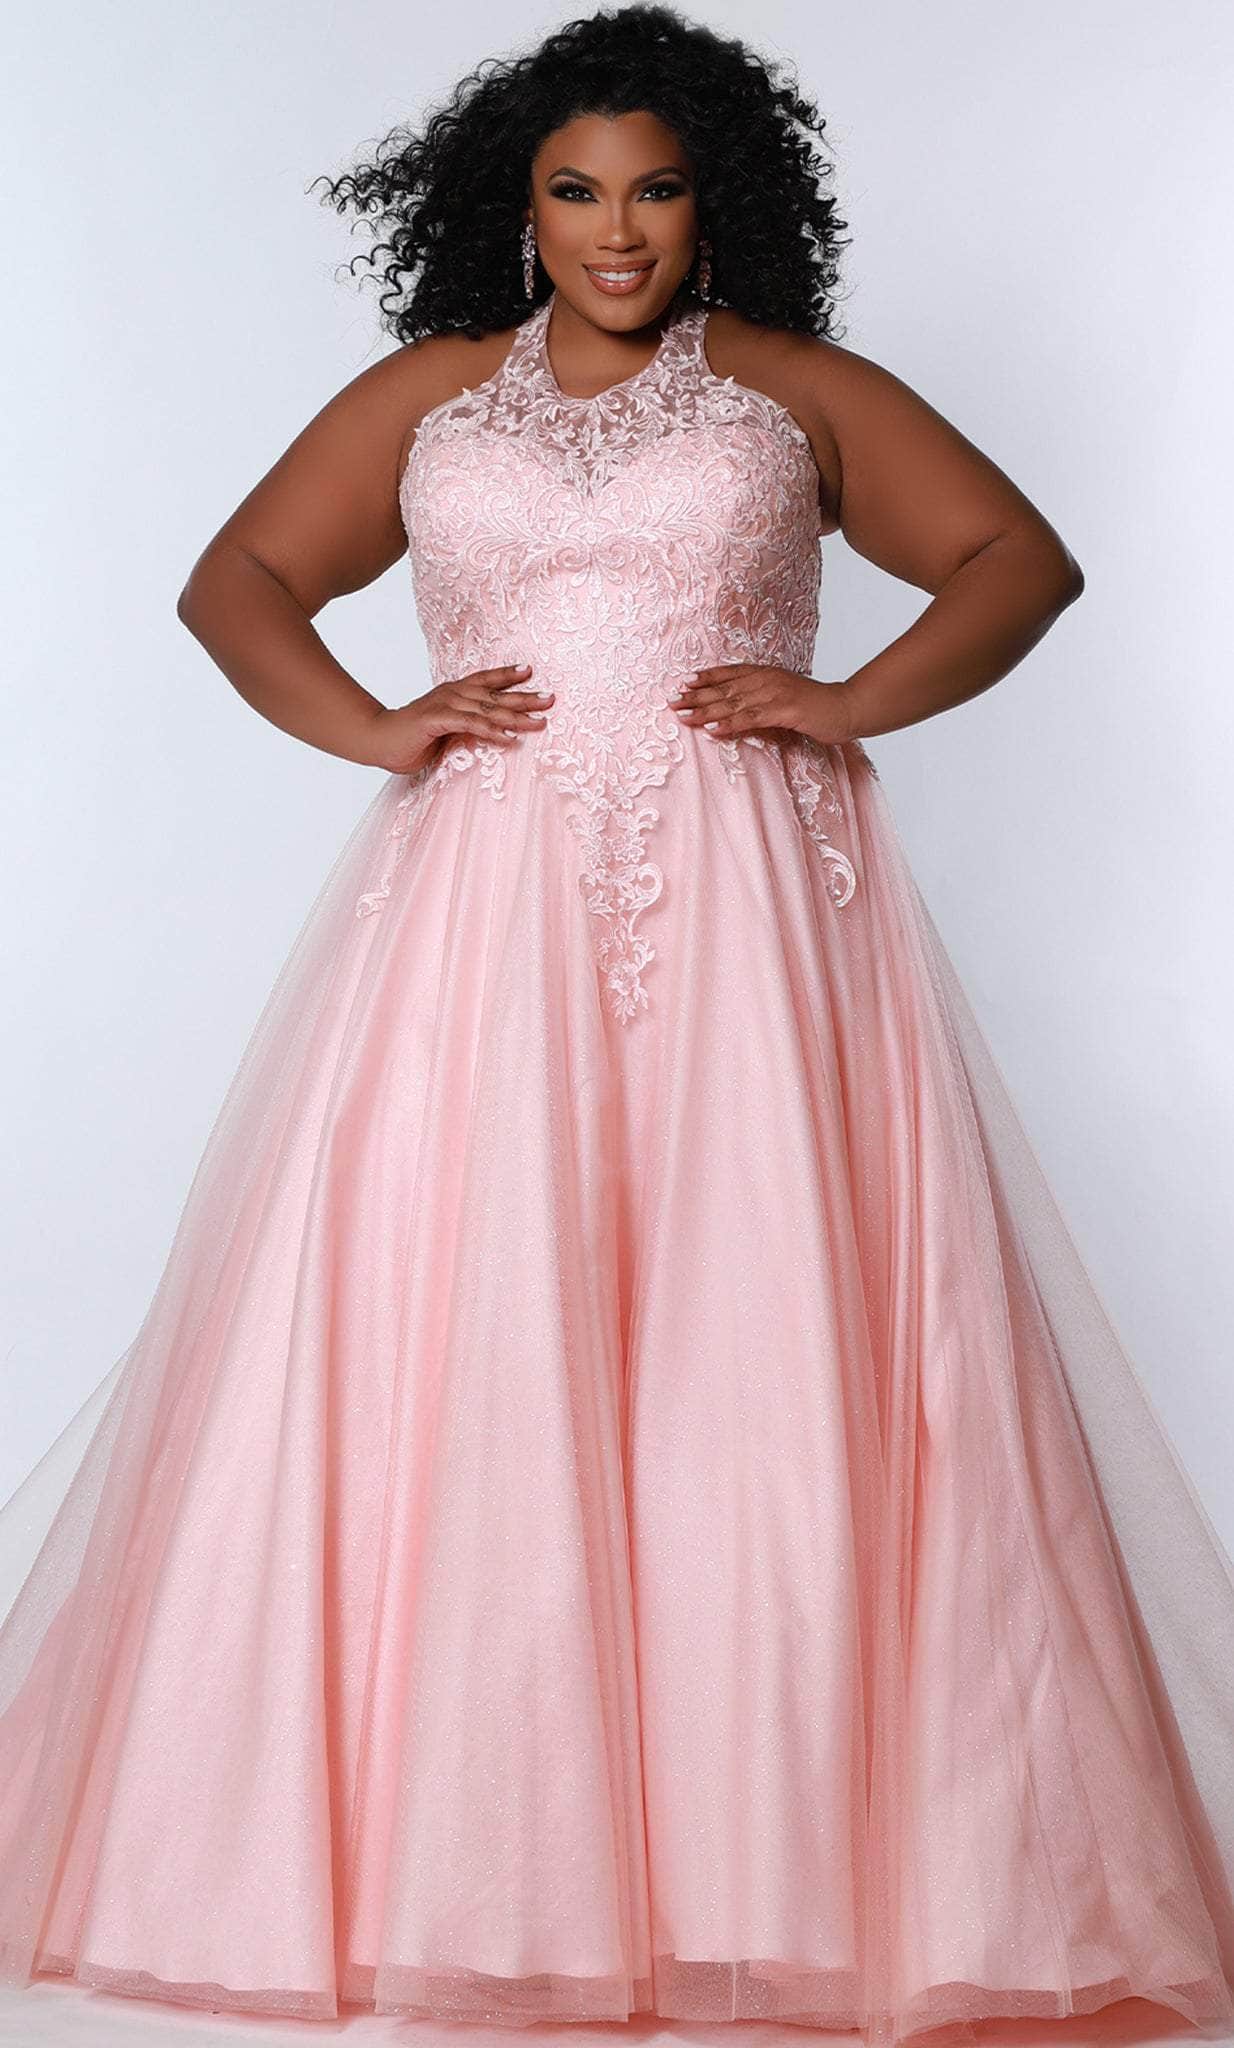 Sydney's Closet SC7352 - Embroidered Halter Prom Gown
